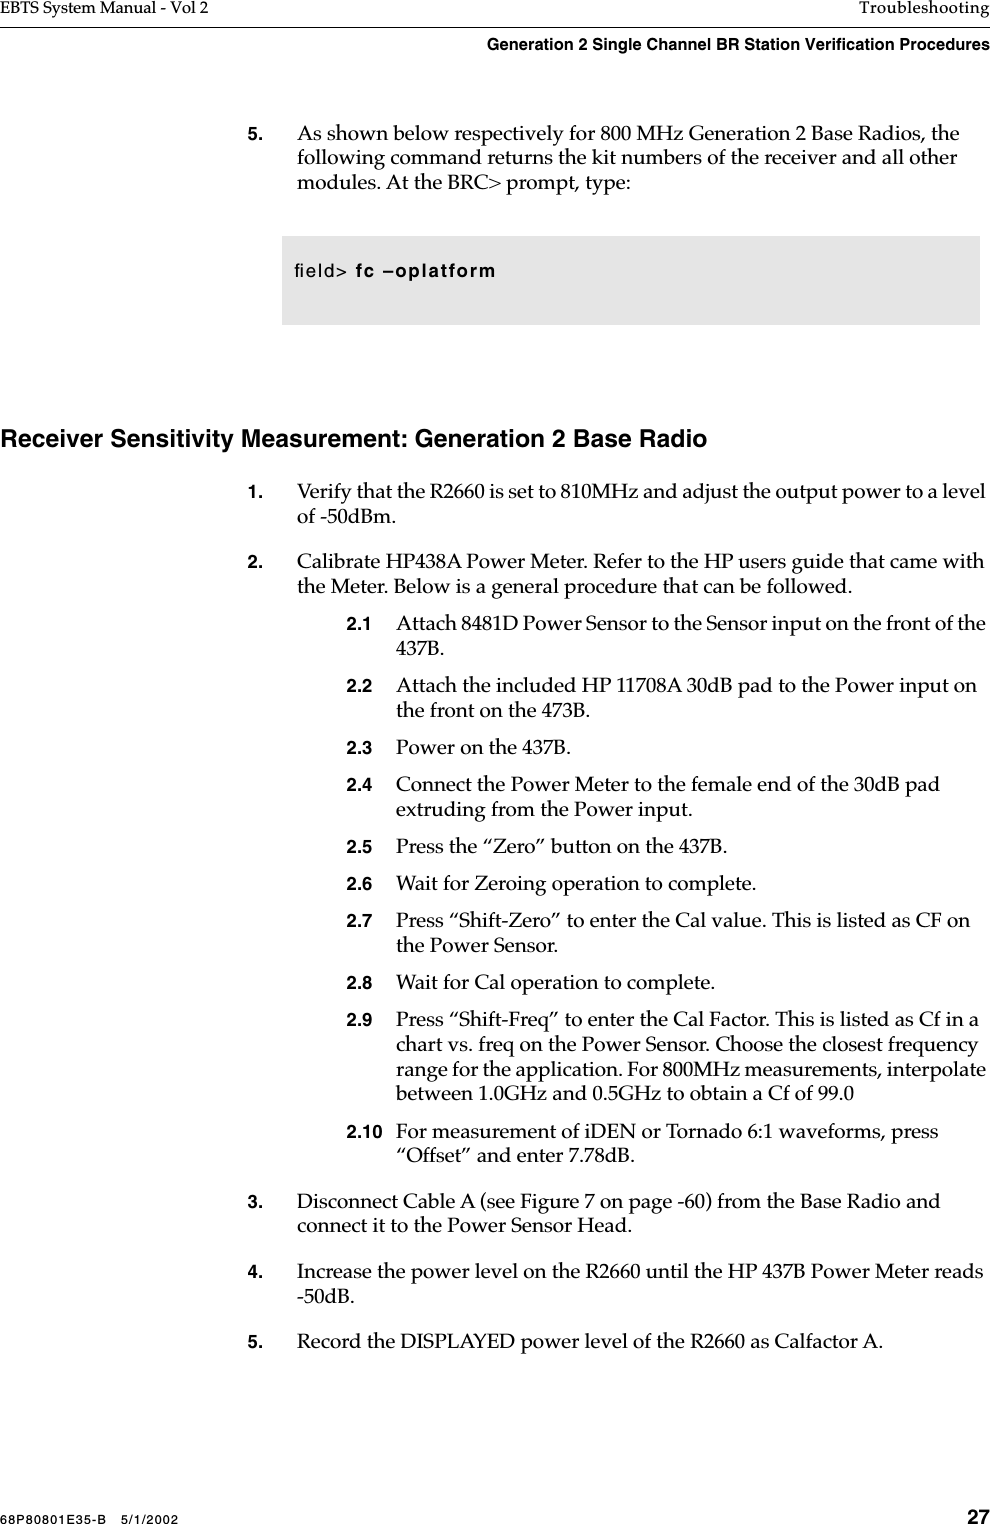 68P80801E35-B   5/1/2002 27EBTS System Manual - Vol 2 TroubleshootingGeneration 2 Single Channel BR Station Verification Procedures 5. As shown below respectively for 800 MHz Generation 2 Base Radios, the following command returns the kit numbers of the receiver and all other modules. At the BRC&gt; prompt, type: Receiver Sensitivity Measurement: Generation 2 Base Radio1. Verify that the R2660 is set to 810MHz and adjust the output power to a level of -50dBm.2. Calibrate HP438A Power Meter. Refer to the HP users guide that came with the Meter. Below is a general procedure that can be followed.2.1 Attach 8481D Power Sensor to the Sensor input on the front of the 437B. 2.2 Attach the included HP 11708A 30dB pad to the Power input on the front on the 473B.2.3 Power on the 437B.2.4 Connect the Power Meter to the female end of the 30dB pad extruding from the Power input.2.5 Press the “Zero” button on the 437B.2.6 Wait for Zeroing operation to complete.2.7 Press “Shift-Zero” to enter the Cal value. This is listed as CF on the Power Sensor.2.8 Wait for Cal operation to complete.2.9 Press “Shift-Freq” to enter the Cal Factor. This is listed as Cf in a chart vs. freq on the Power Sensor. Choose the closest frequency range for the application. For 800MHz measurements, interpolate between 1.0GHz and 0.5GHz to obtain a Cf of 99.02.10 For measurement of iDEN or Tornado 6:1 waveforms, press “Offset” and enter 7.78dB.3. Disconnect Cable A (see Figure 7 on page -60) from the Base Radio and connect it to the Power Sensor Head.4. Increase the power level on the R2660 until the HP 437B Power Meter reads -50dB.5. Record the DISPLAYED power level of the R2660 as Calfactor A.ﬁeld&gt; fc –oplatform